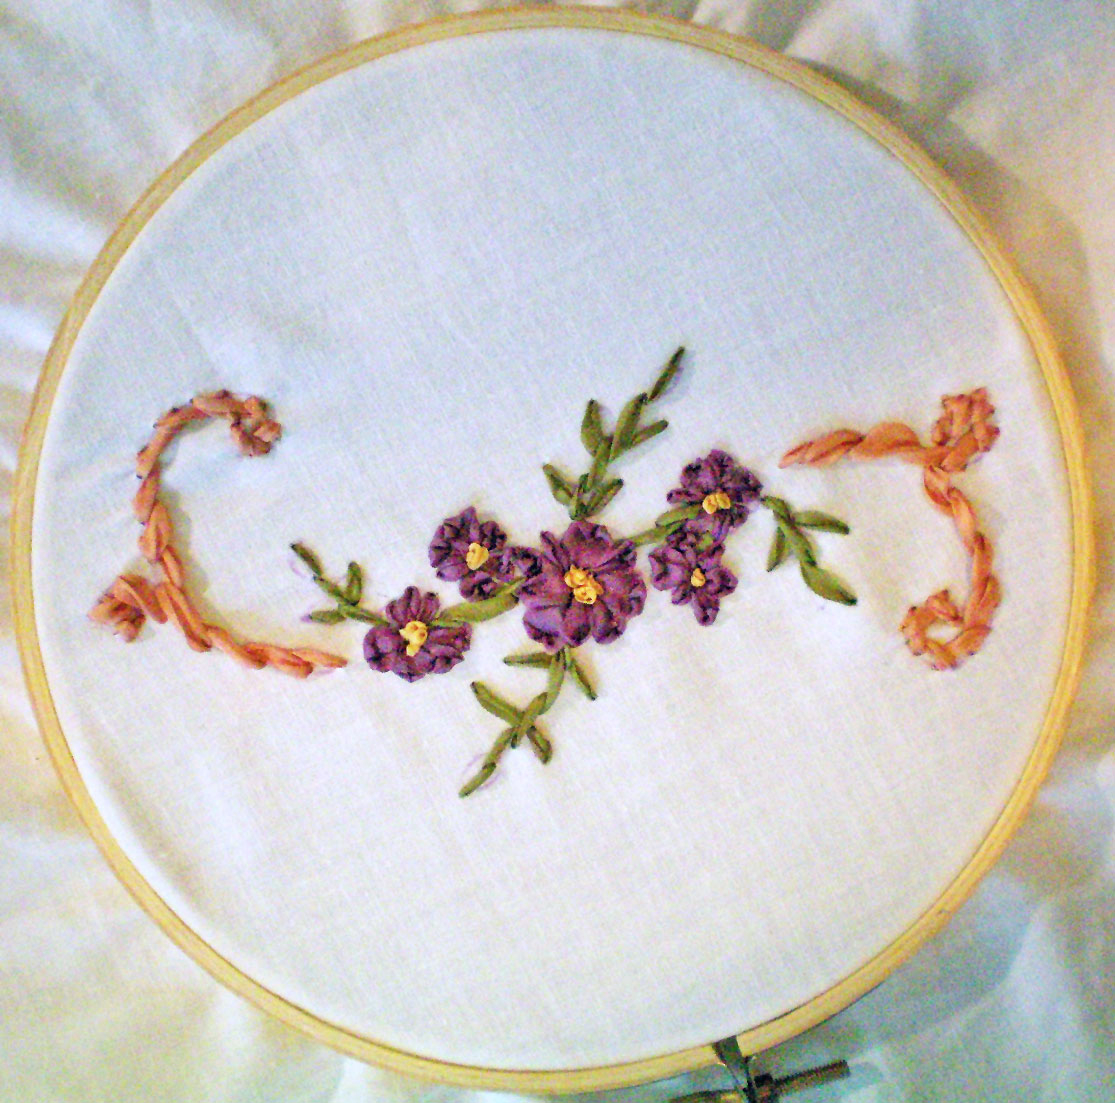 Ribbon Embroidery Patterns Free The Art Of Silk Ribbon Embroidery Part I Yesterdays Thimble